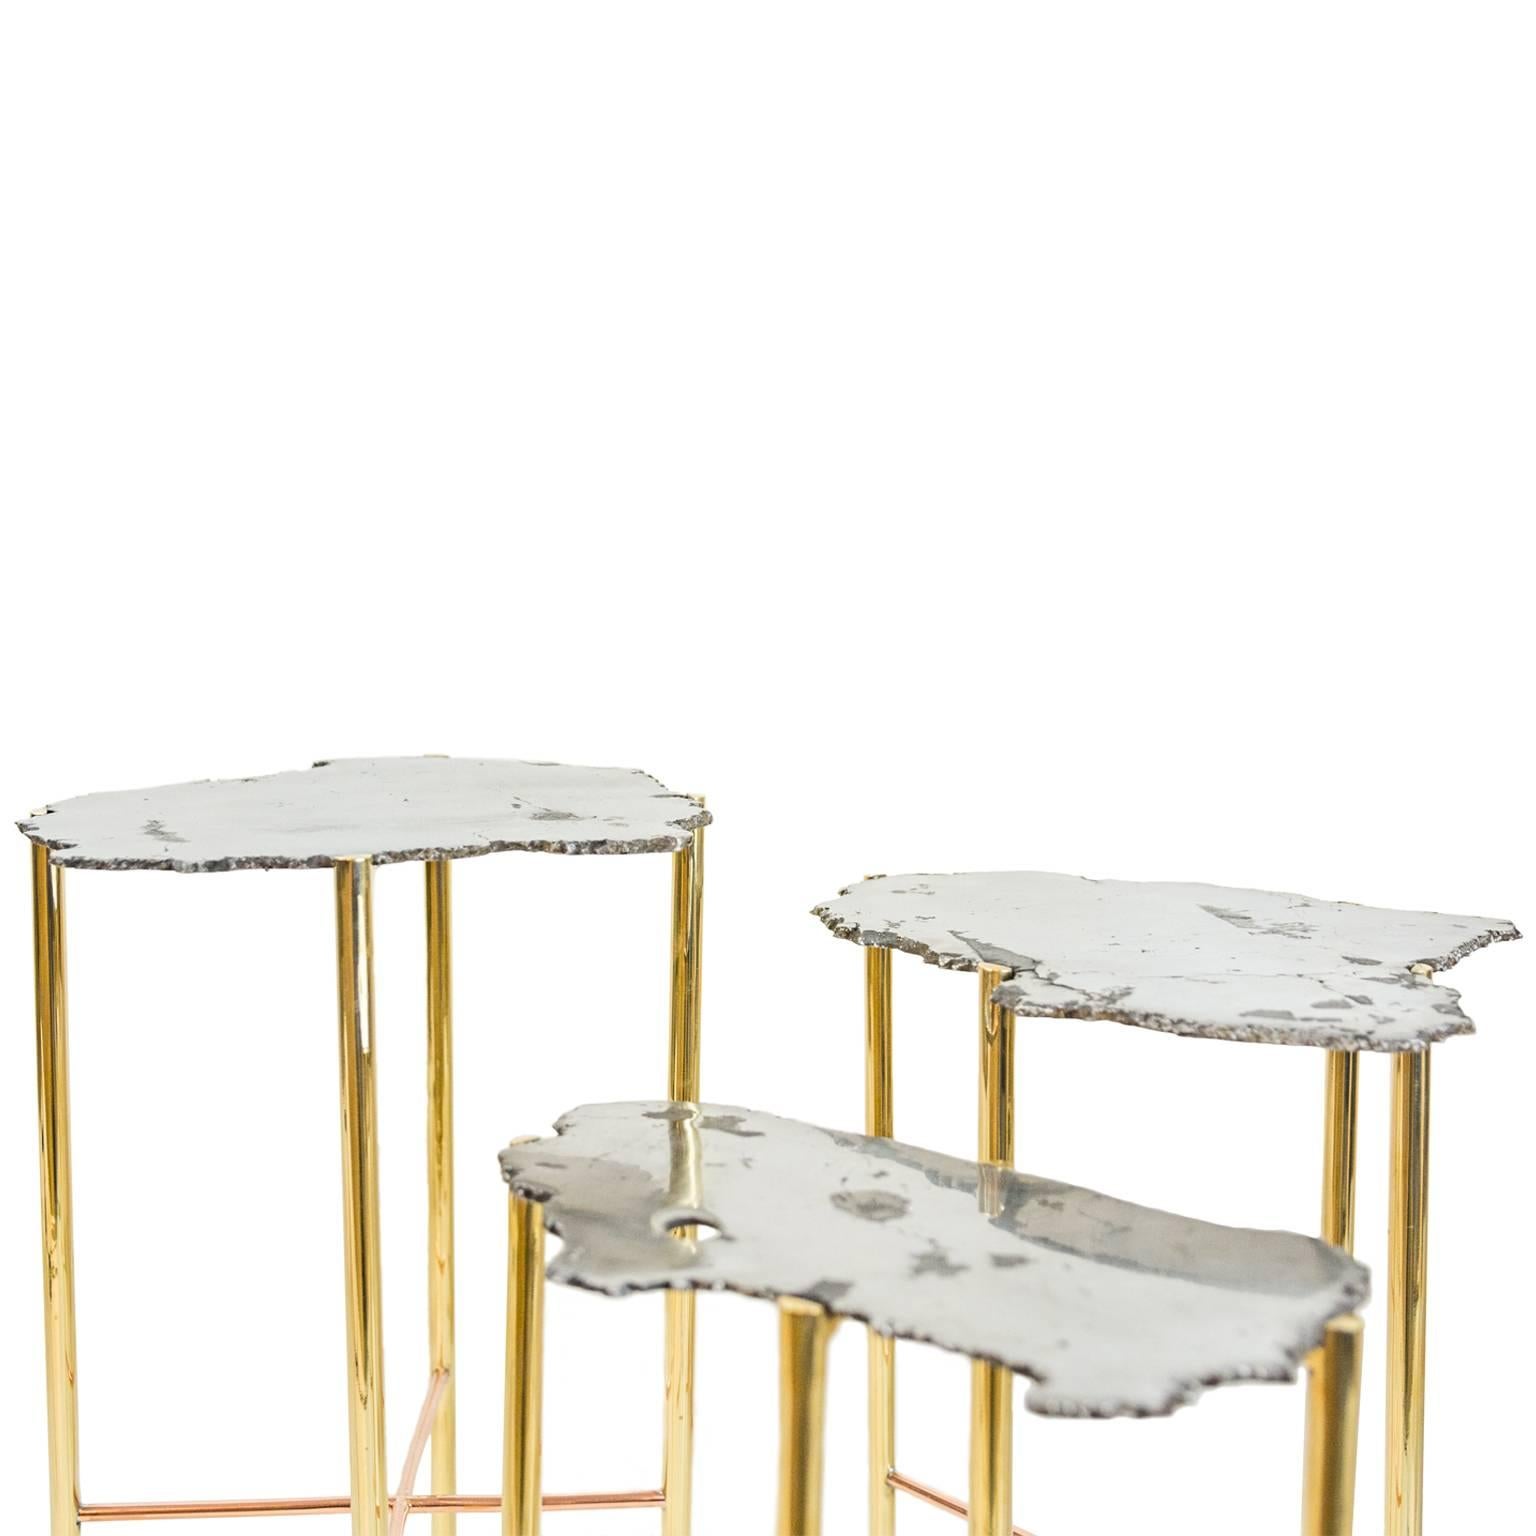 Christopher Kreiling cocktail table set with solid brass or copper legs, and table tops made from cross section of meteorite.


Set of three; measure: 18 H, 19 H, 20 H, dimensions variable. Diameter variable.